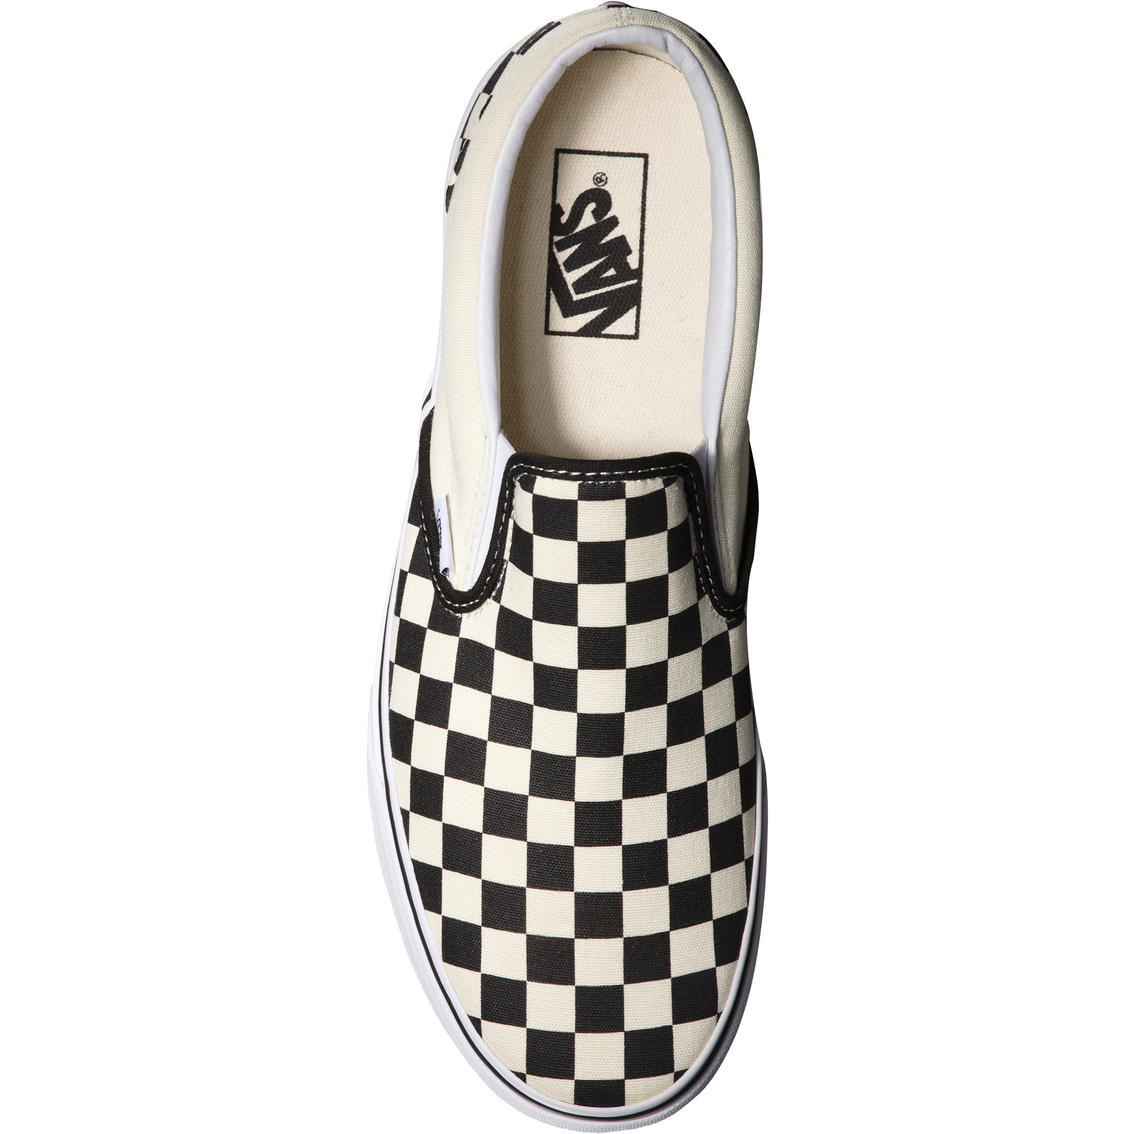 Vans Women's Classic Checkerboard Slip On Shoes - Image 4 of 5